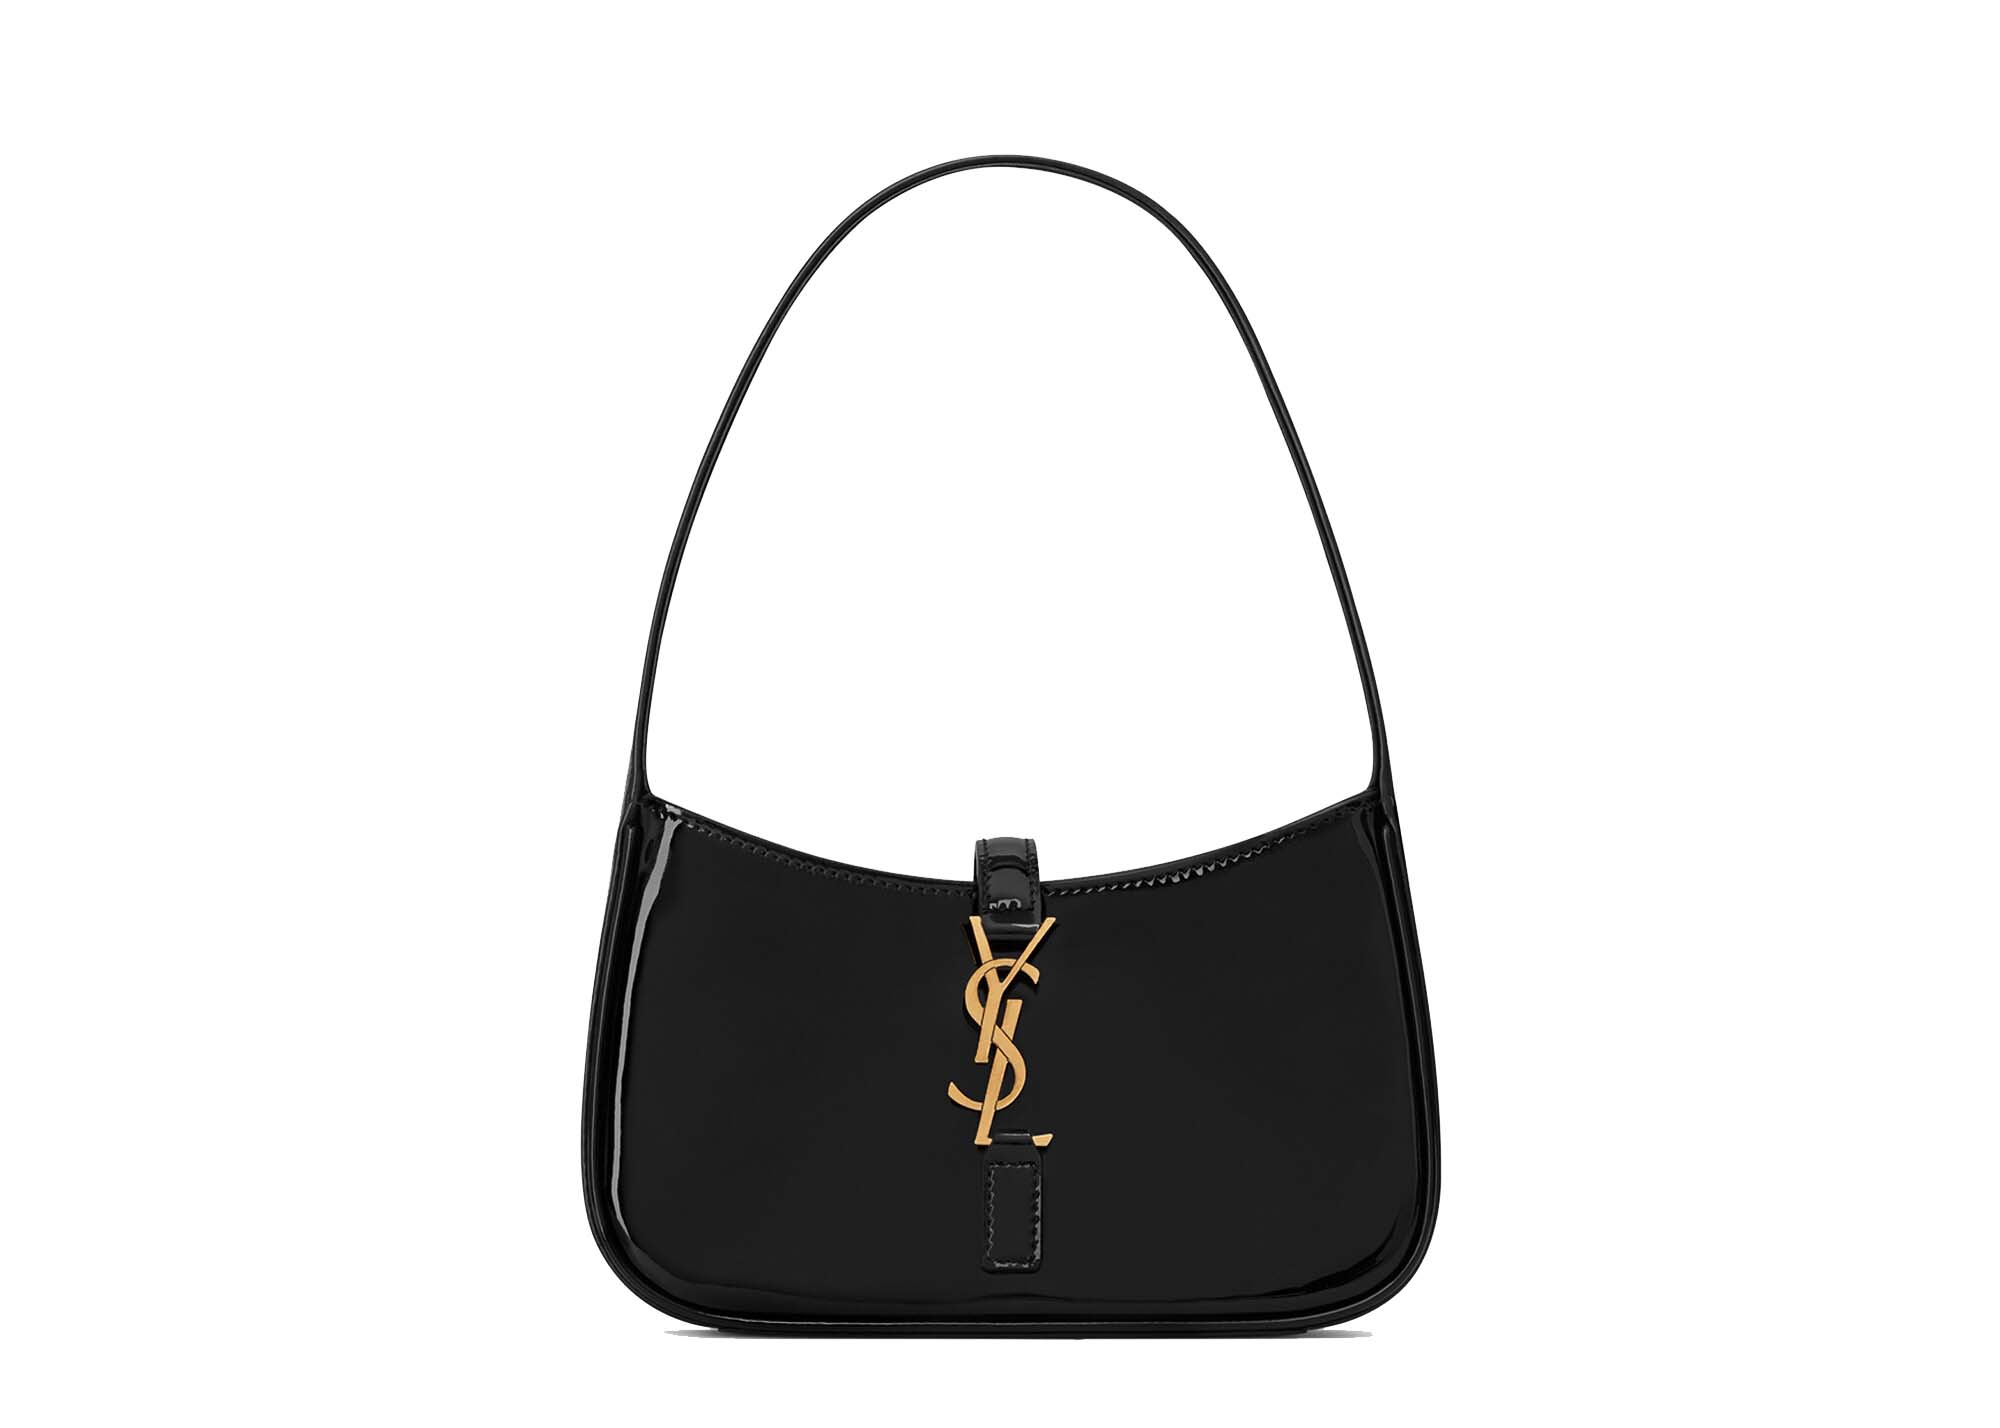 Saint Laurent Le 5 A 7 Mini Hobo Bag In Shiny Leather Black in ...